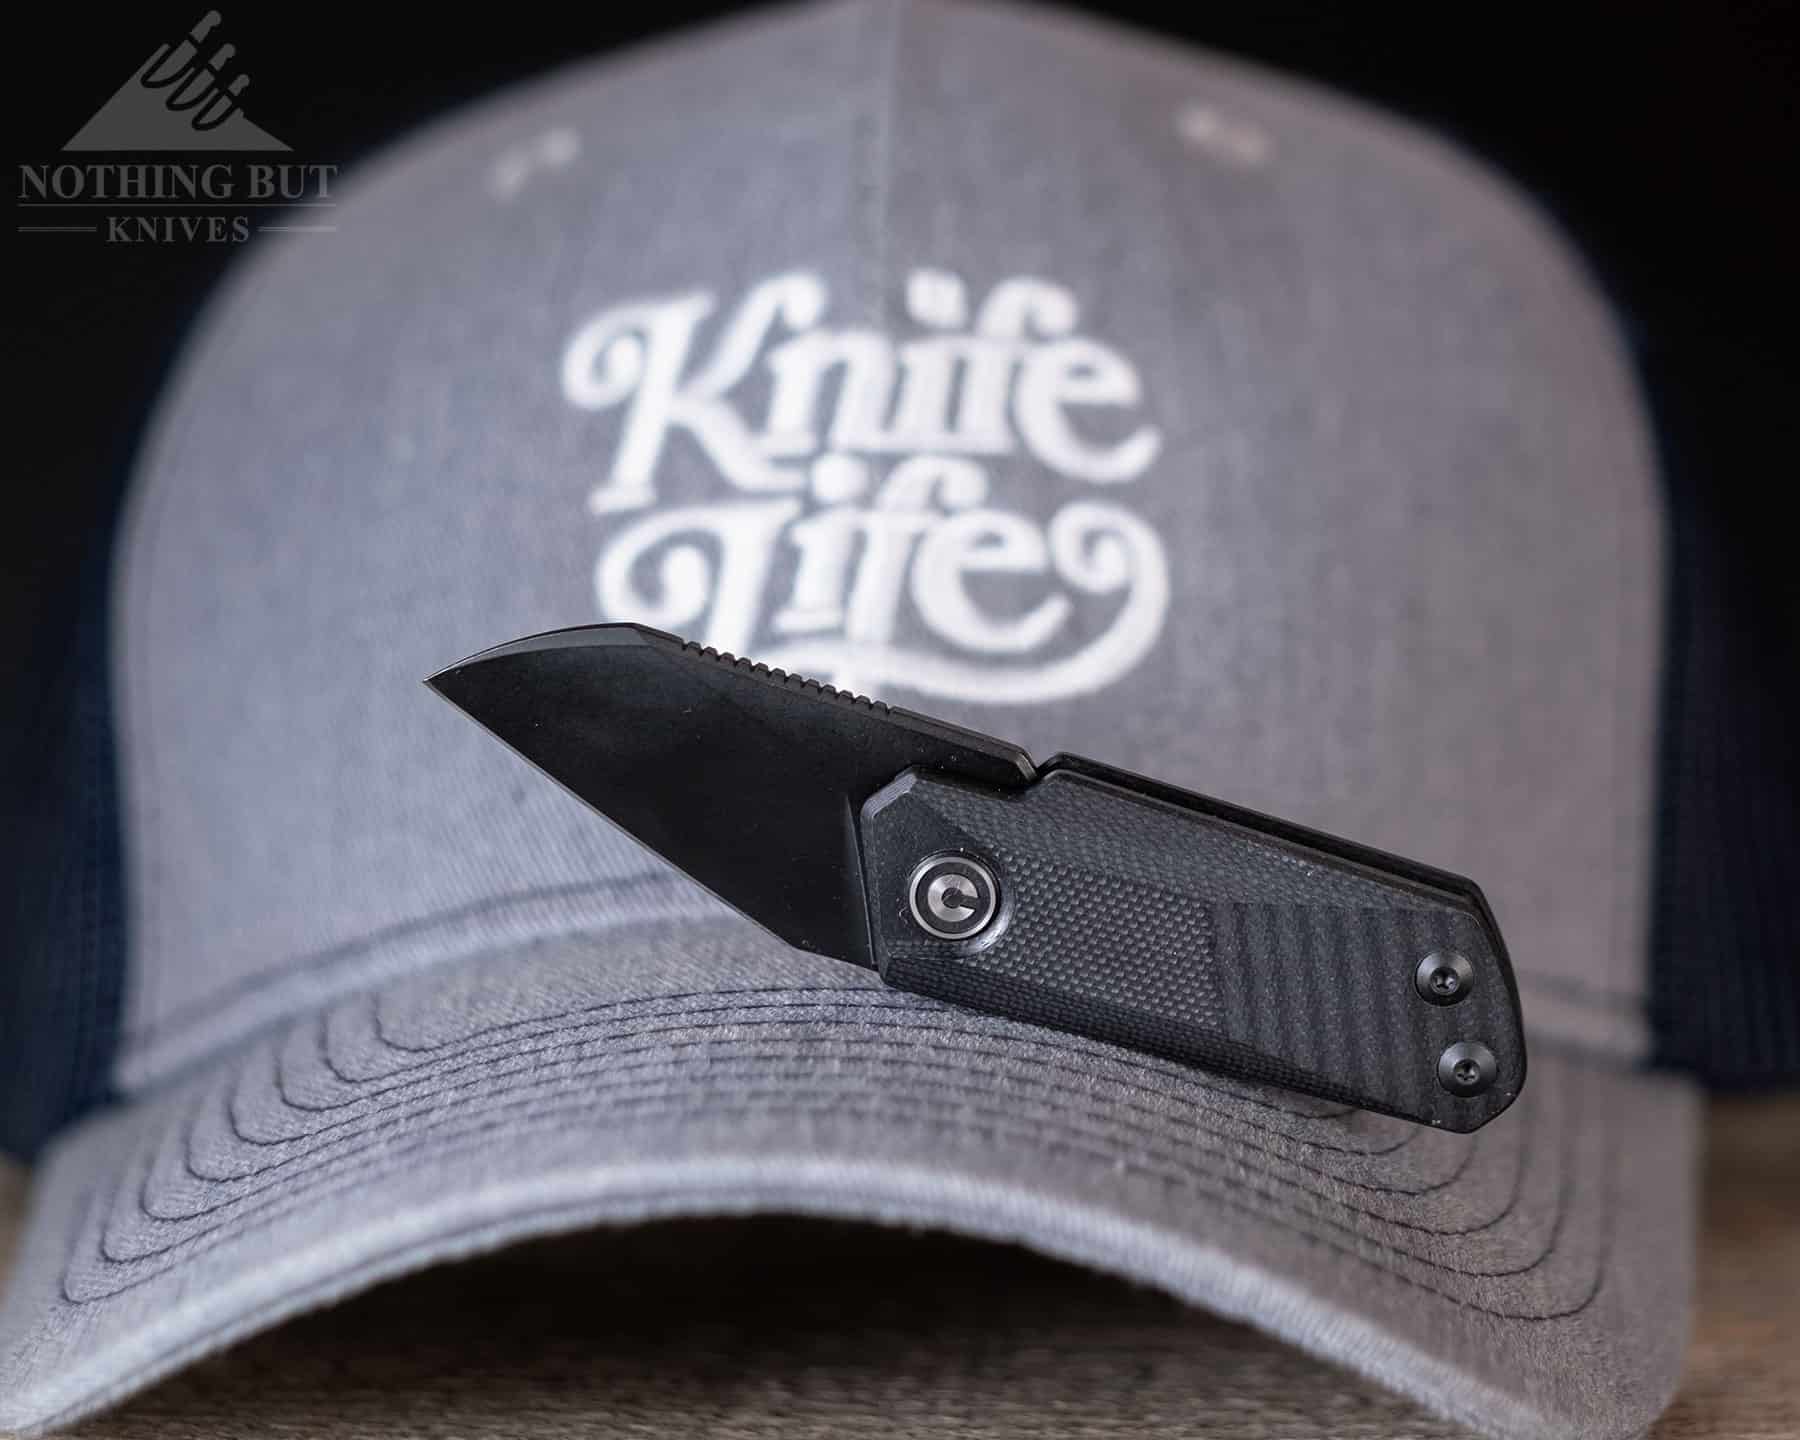 The modern look of the Civivi Ki-V sets it apart from most slip joints, but it is still practical knife that is legal to carry almost anywhere. 